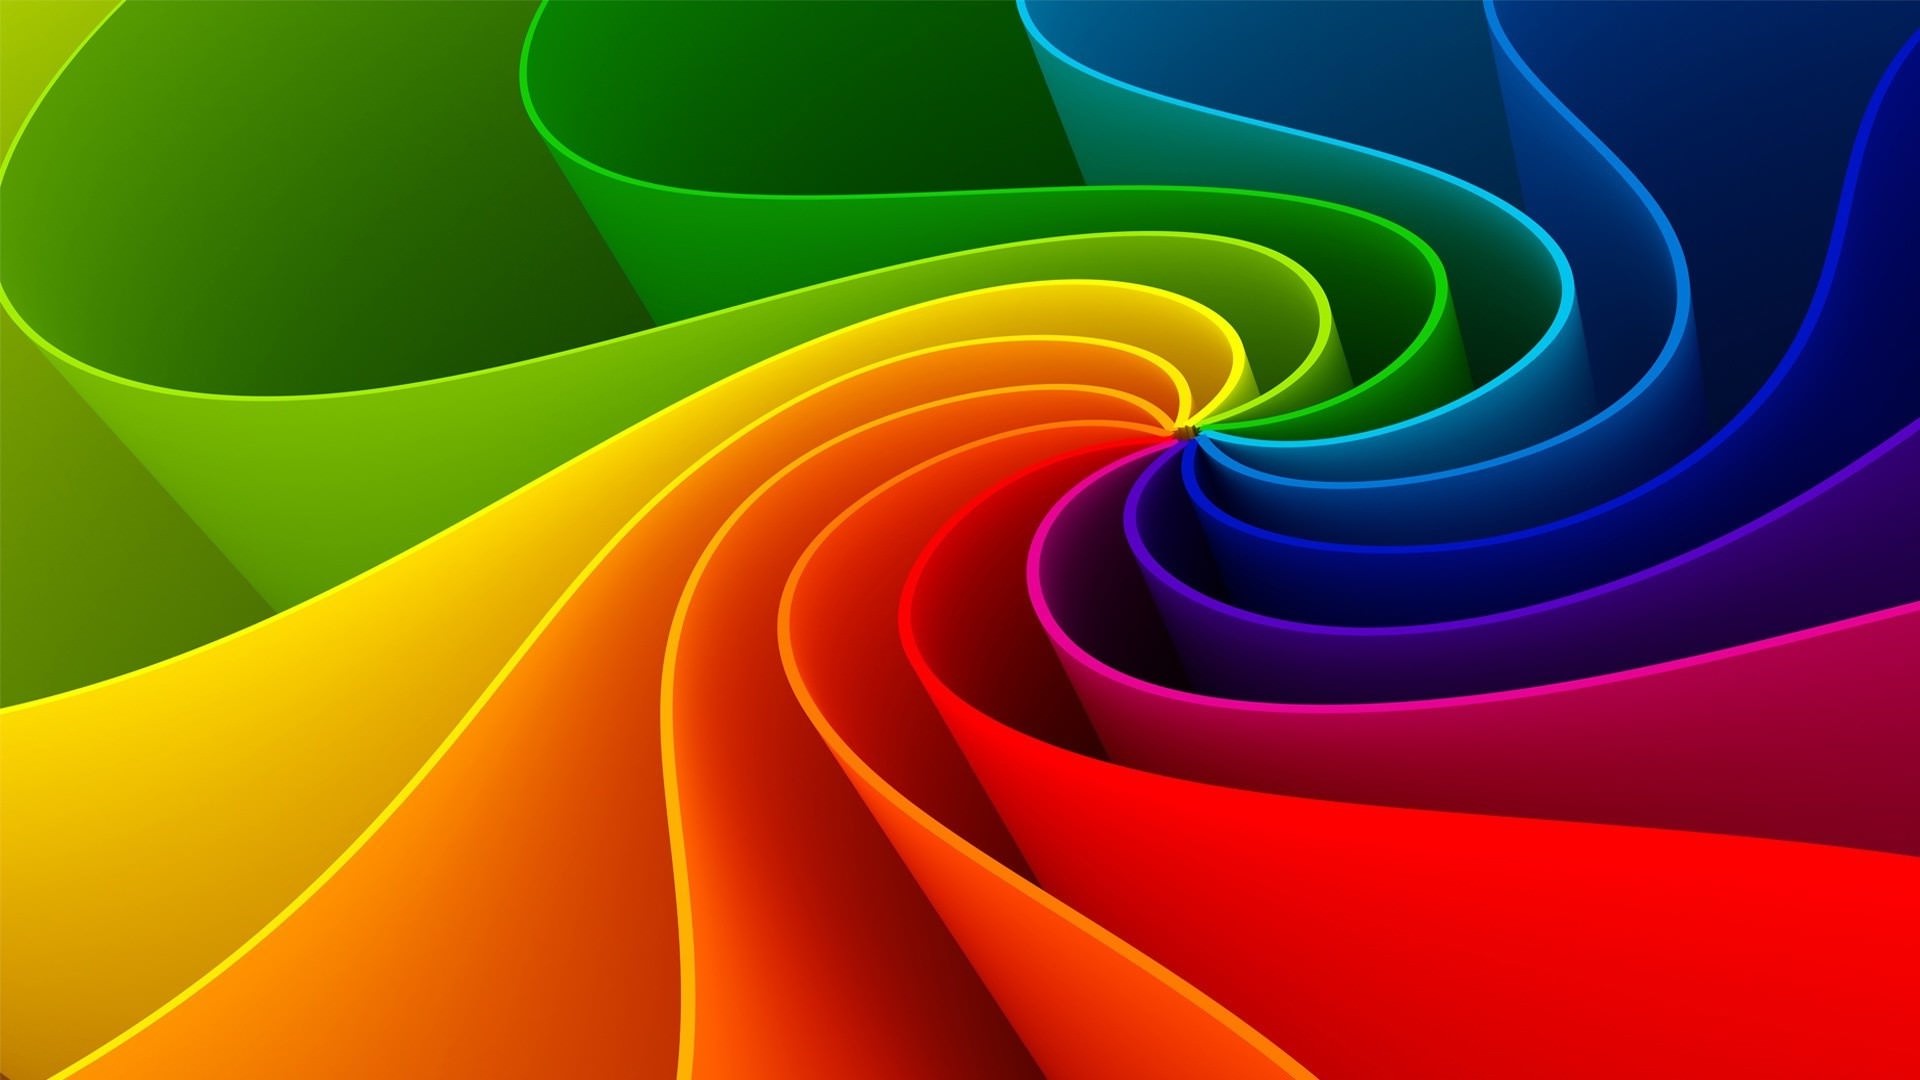 HD Rainbow Background Image And Wallpaper Creatives